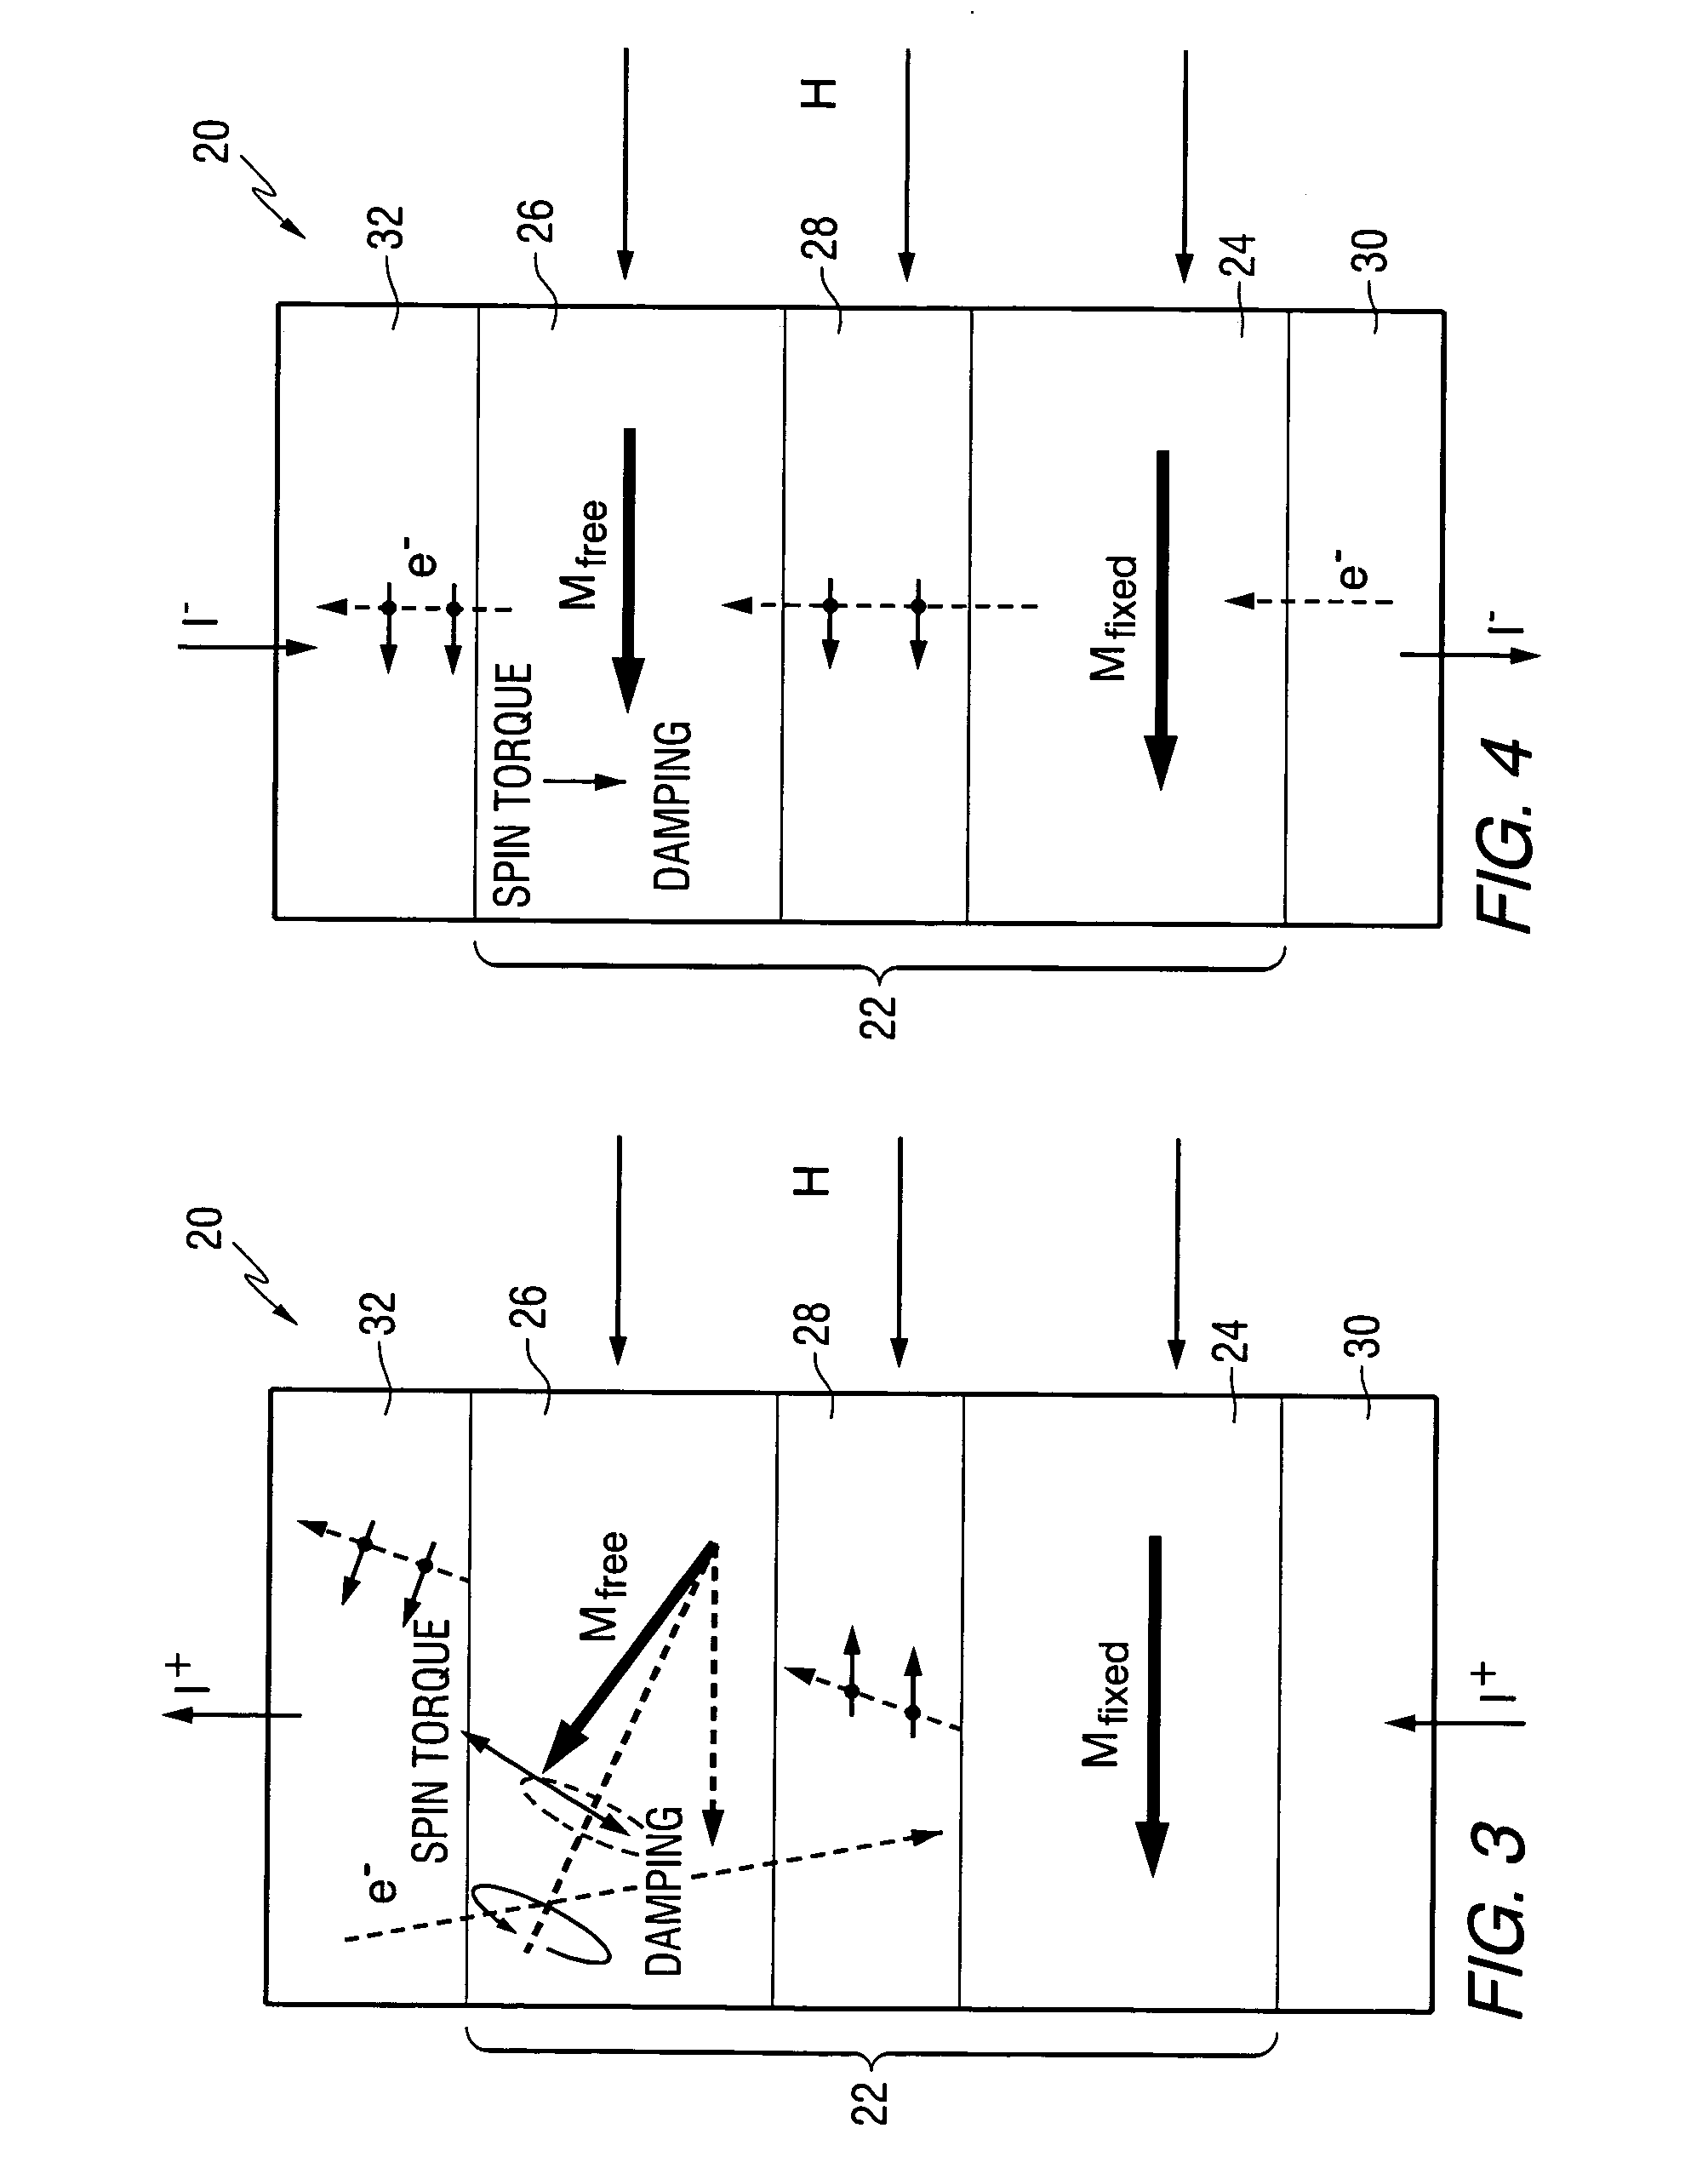 WAMR writer with an integrated spin momentum transfer driven oscillator for generating a microwave assist field